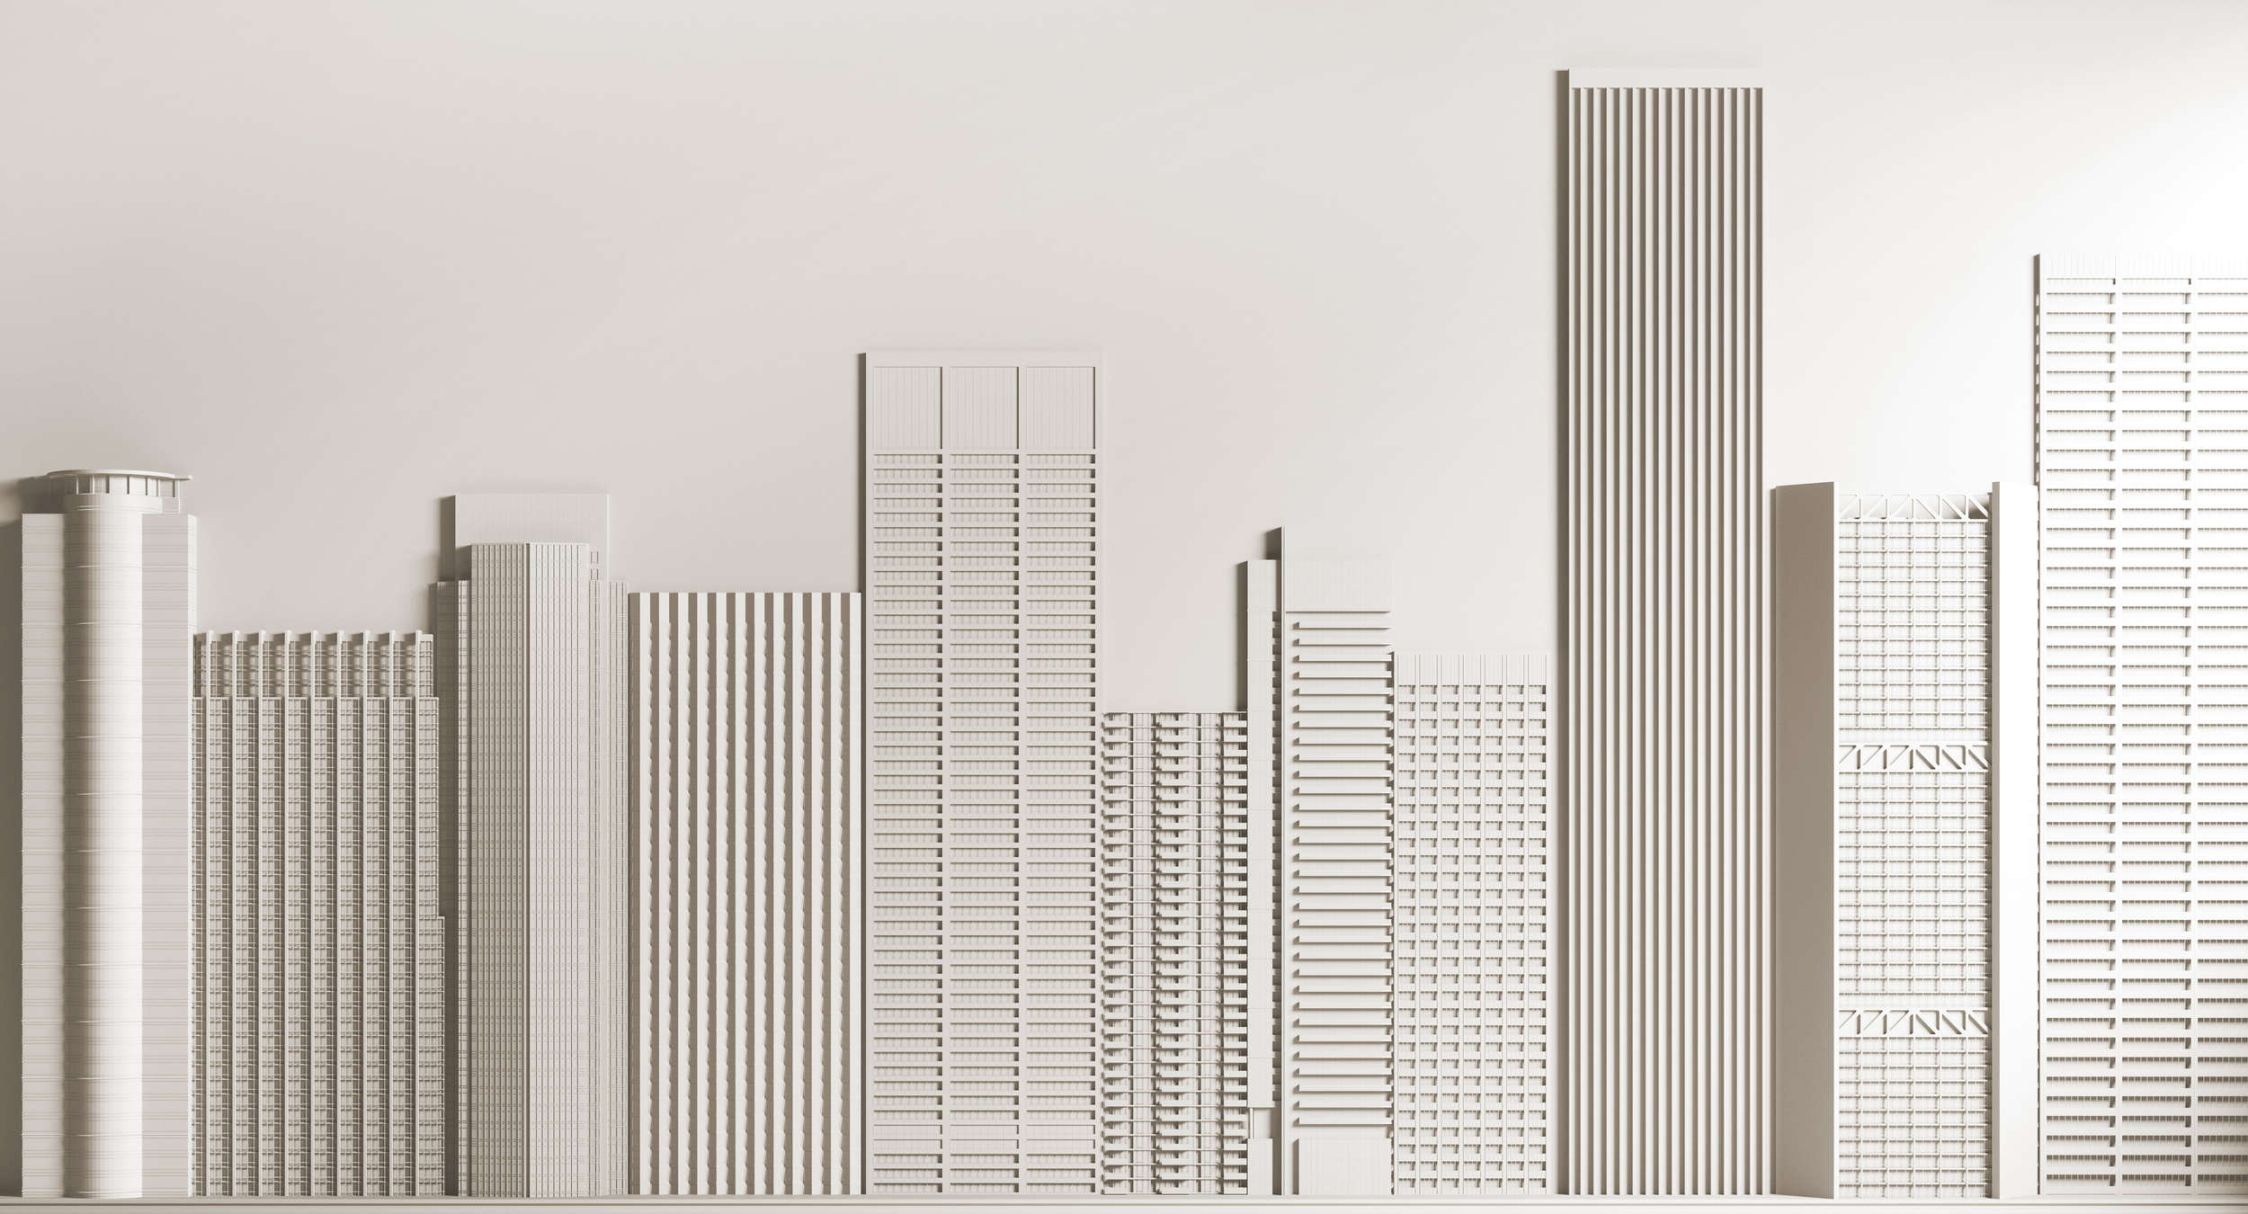             Photo wallpaper »new skyline« - Architecture with skyscrapers - Lightly textured non-woven fabric
        